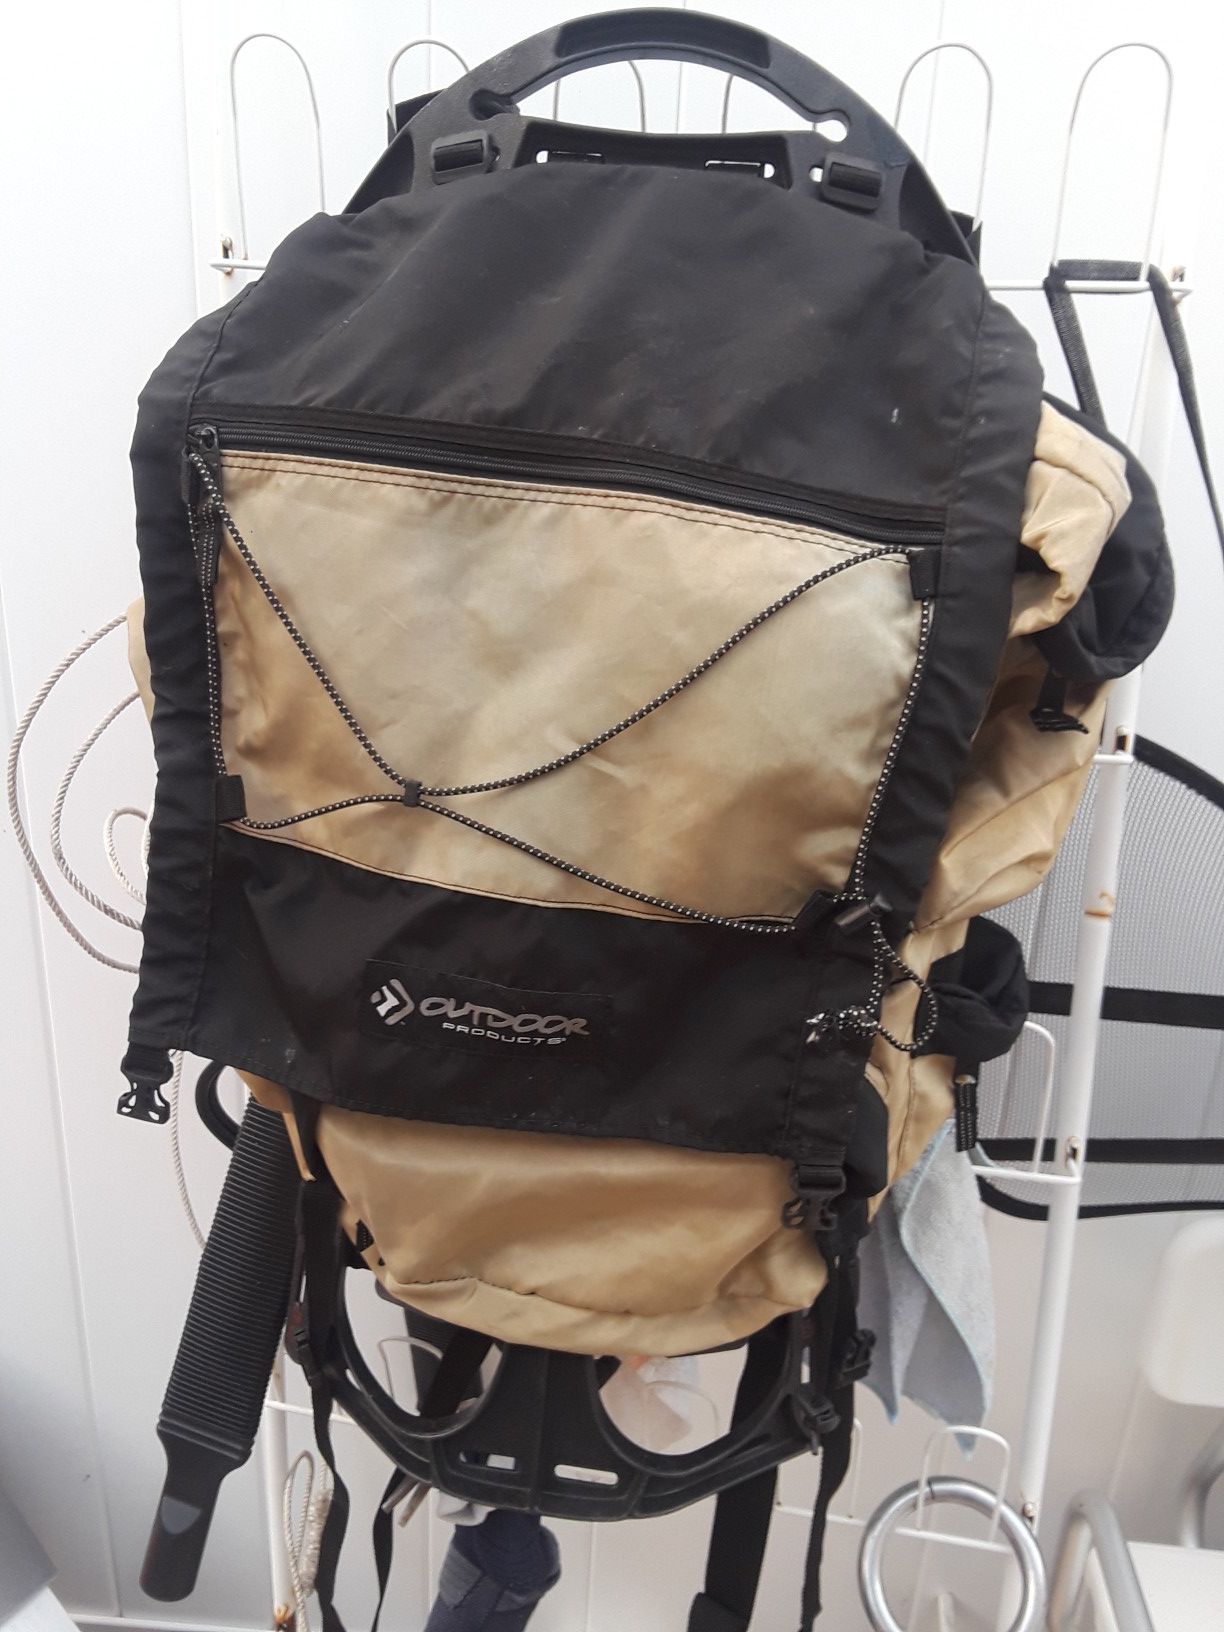 Outdoor products external frame backpack hiking camping trekking